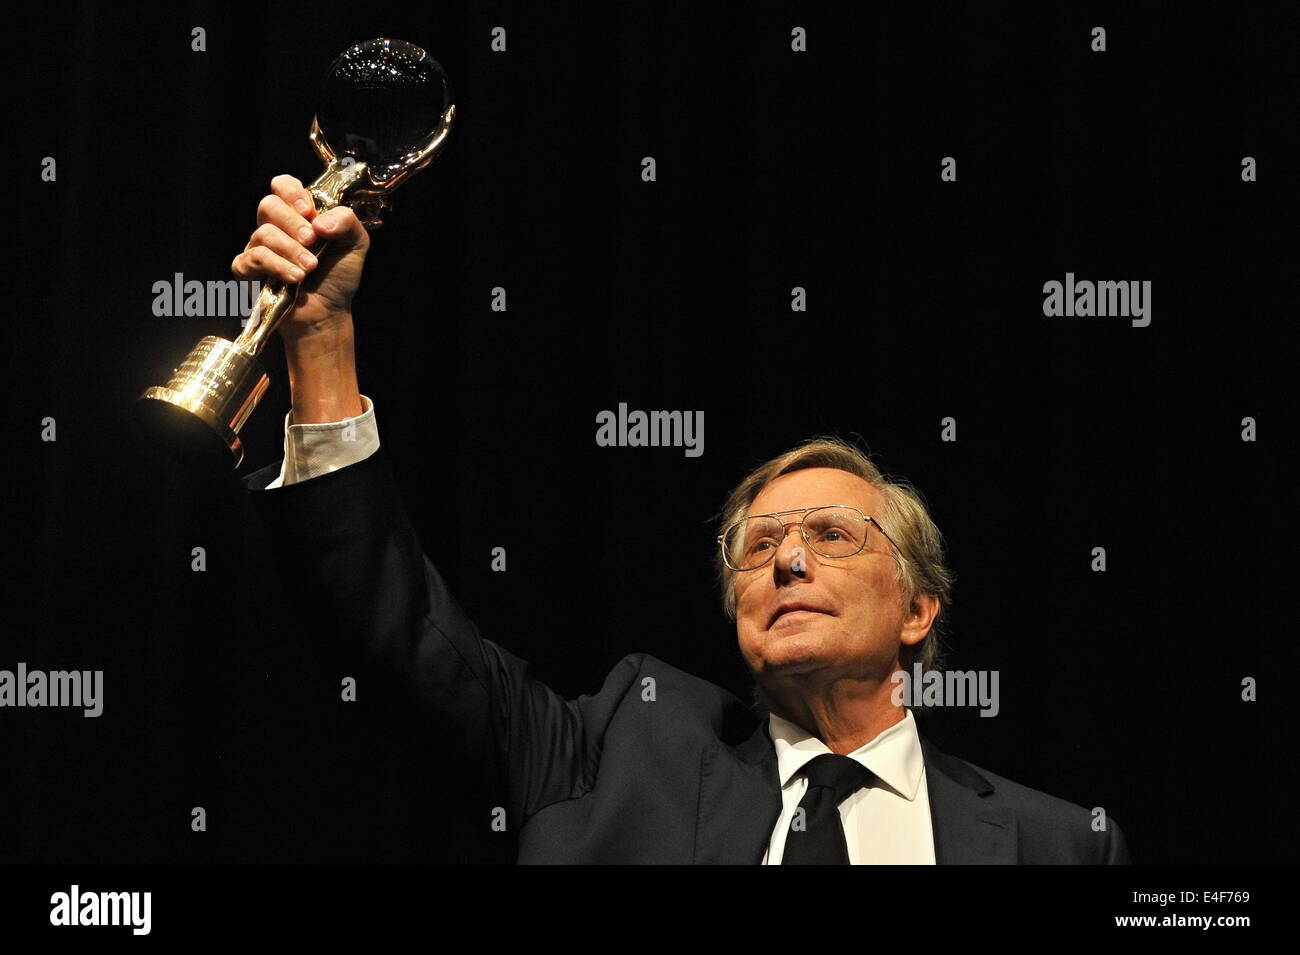 Karlovy Vary, Czech Republic. 9th July, 2014. American film director, producer and screenwriter William Friedkin received the Crystal Globe for Outstanding Artistic Contribution to World Cinema award at the 49th International Film Festival in Karlovy Vary, Czech Republic, Wednesday, July 9, 2014. Credit:  Pavel Nemecek/CTK Photo/Alamy Live News Stock Photo